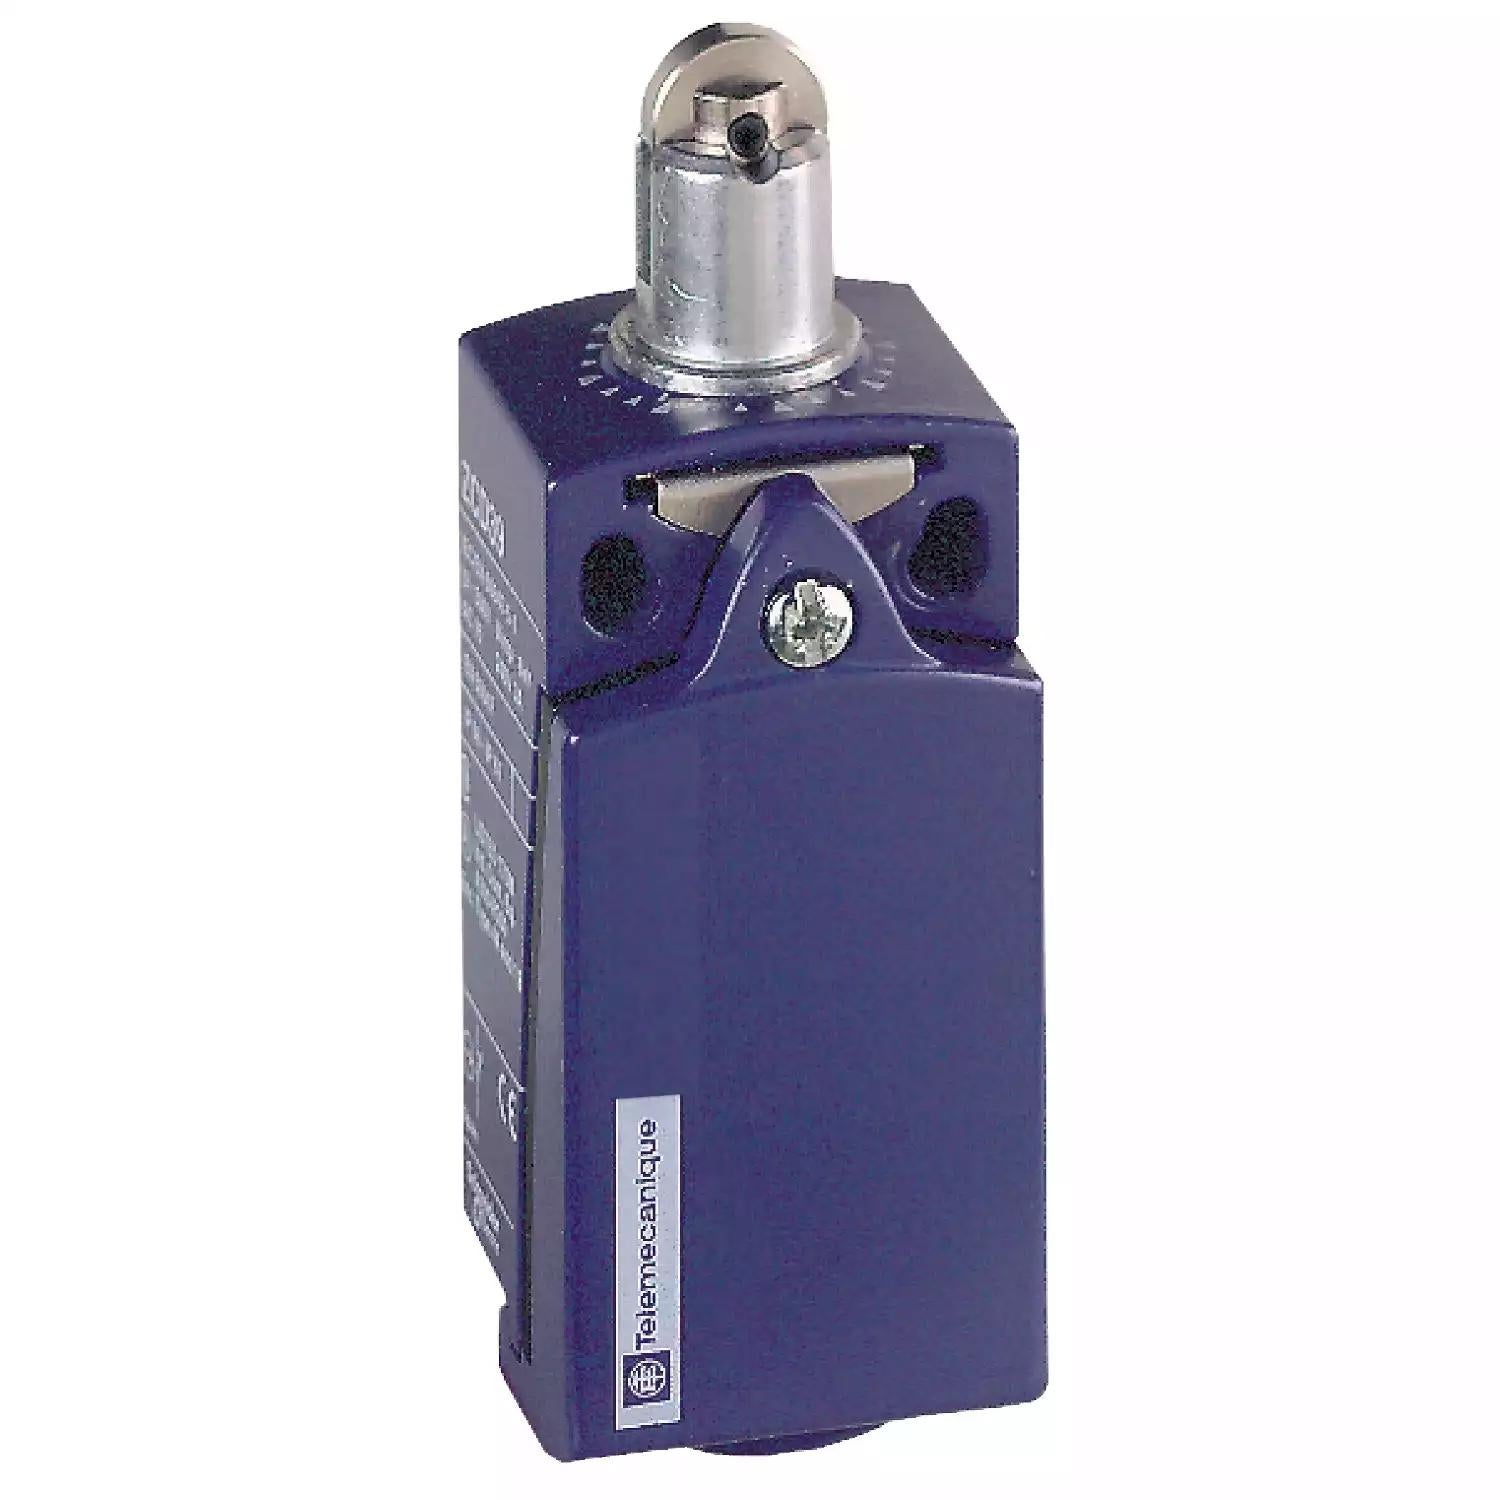 Limit switch, Limit switches XC Standard, XCKD, steel roller plunger, 1NC+1 NO, snap, M16